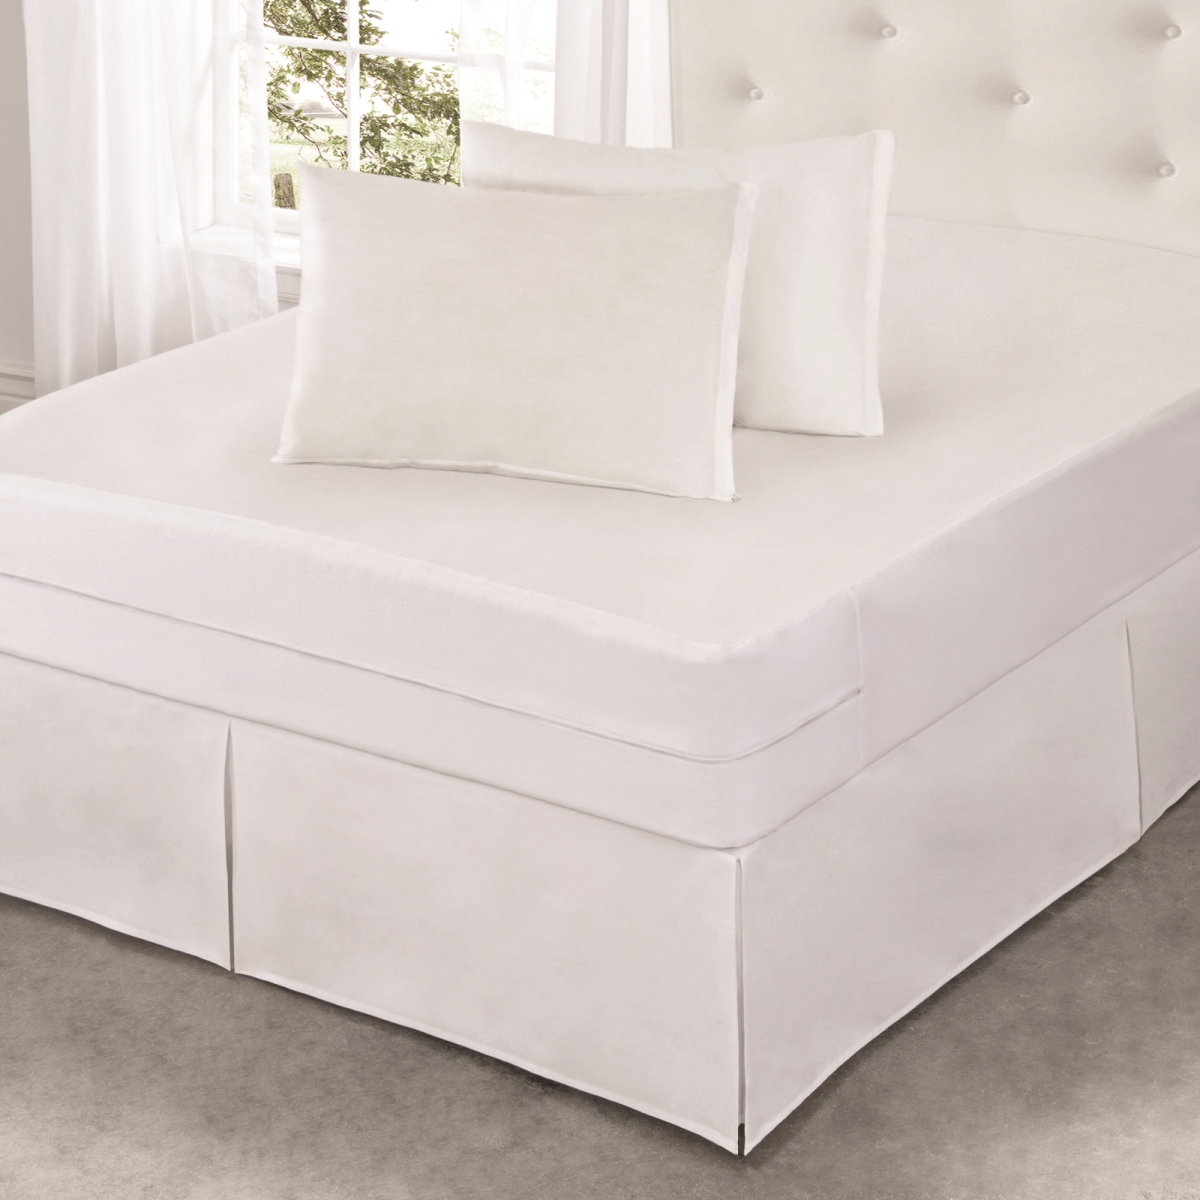 All172xxwhit04 Cool Bamboo Mattress Protector With Bed Bug Blocker, White - King Size